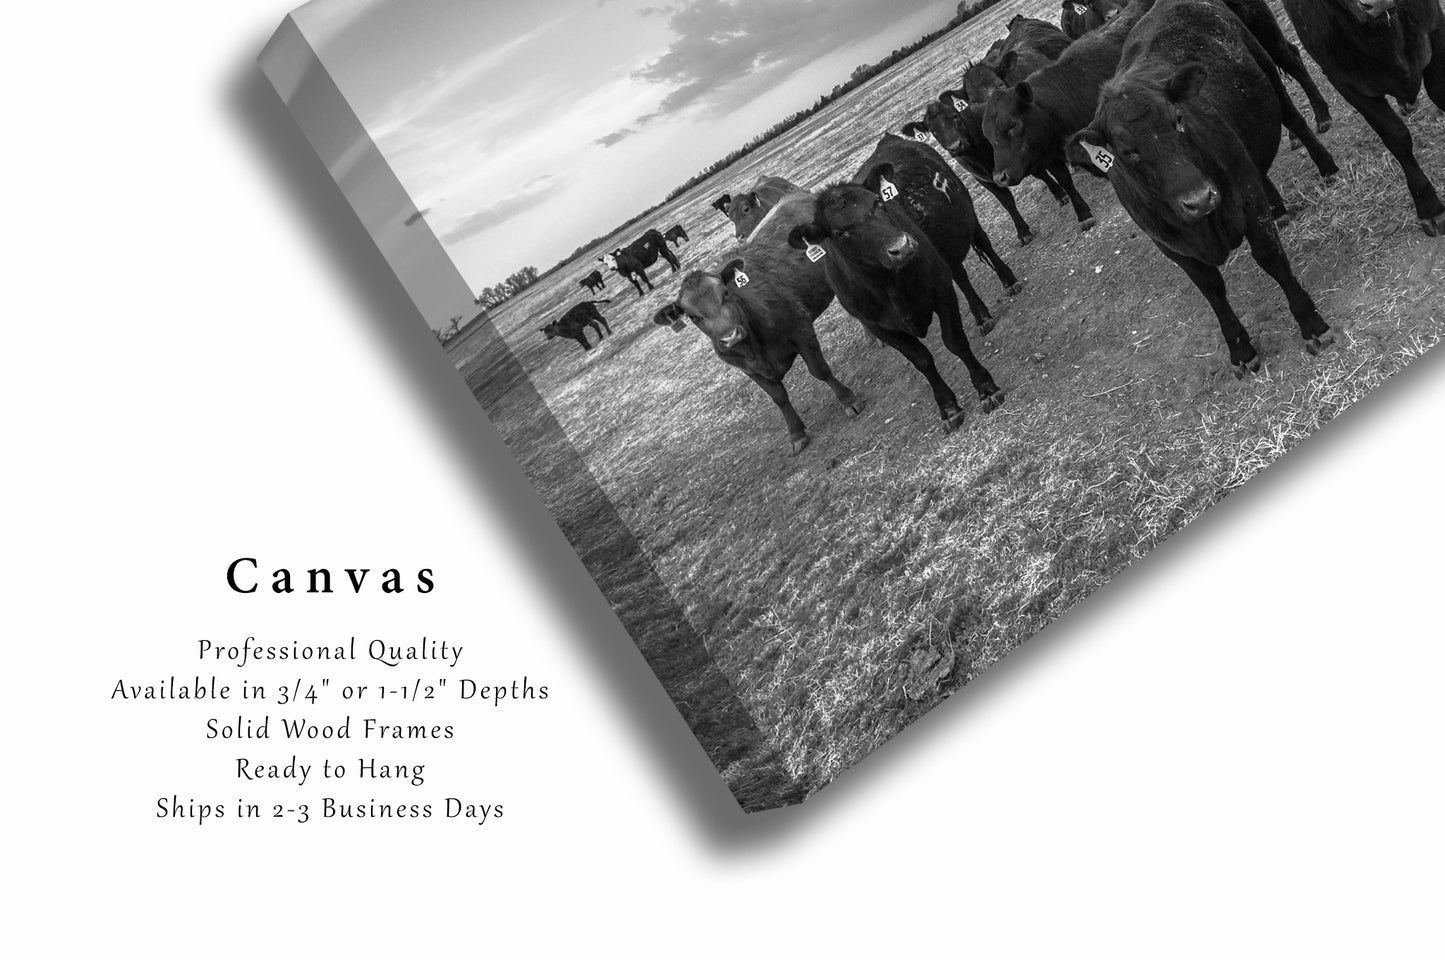 Cow Canvas | Angus Cattle Herd Gallery Wrap | Kansas Photography | Black and White Wall Art | Farmhouse Decor | Ready to Hang